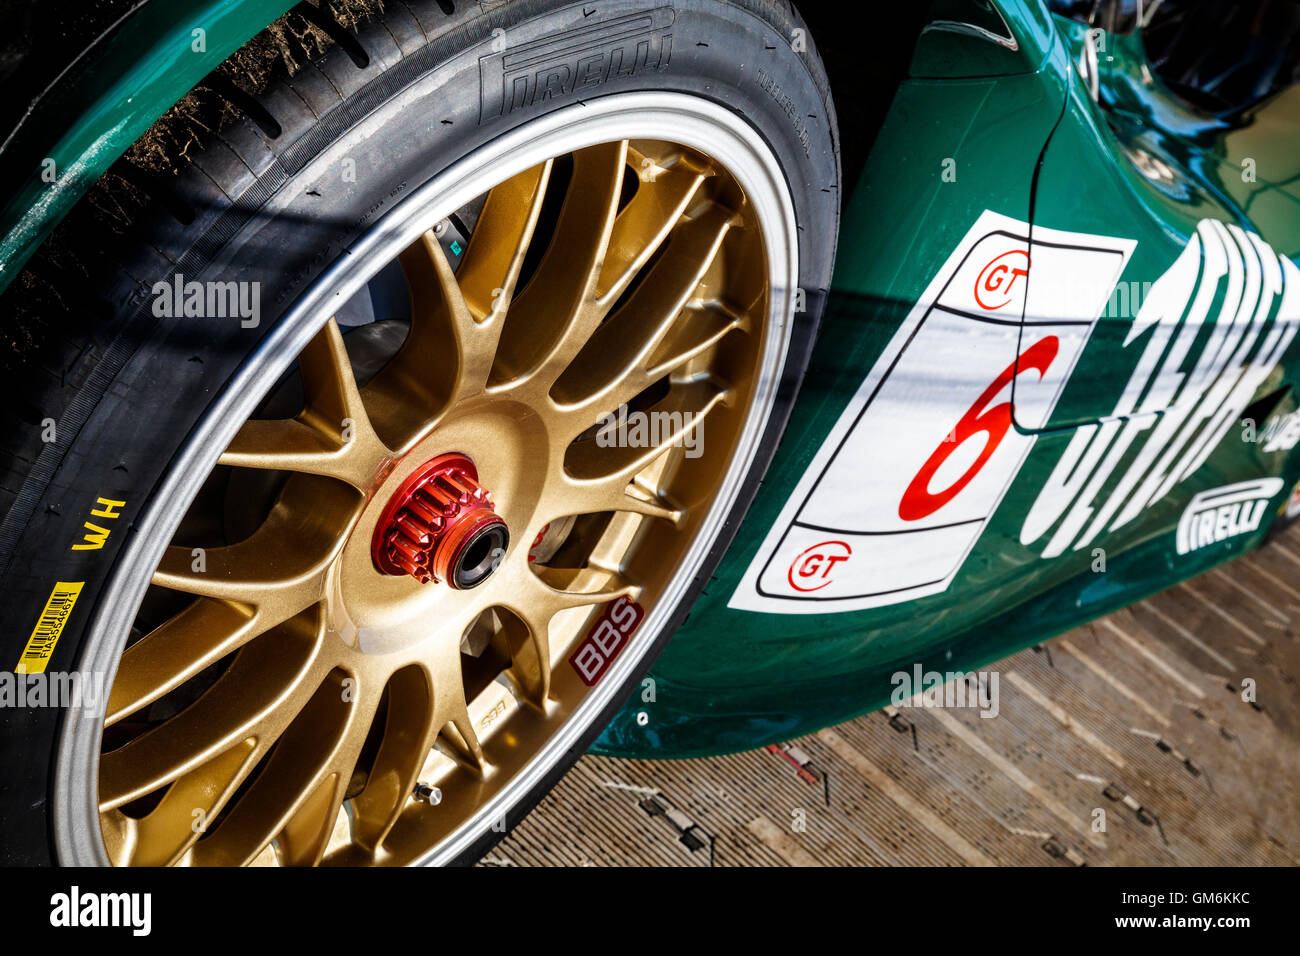 Wheel and hub detail of Bartels and Hahne's 1998 Porsche 911 GT1-98 Le Mans racer. 2016 Goodwood Festival of Speed, Sussex, UK. Stock Photo